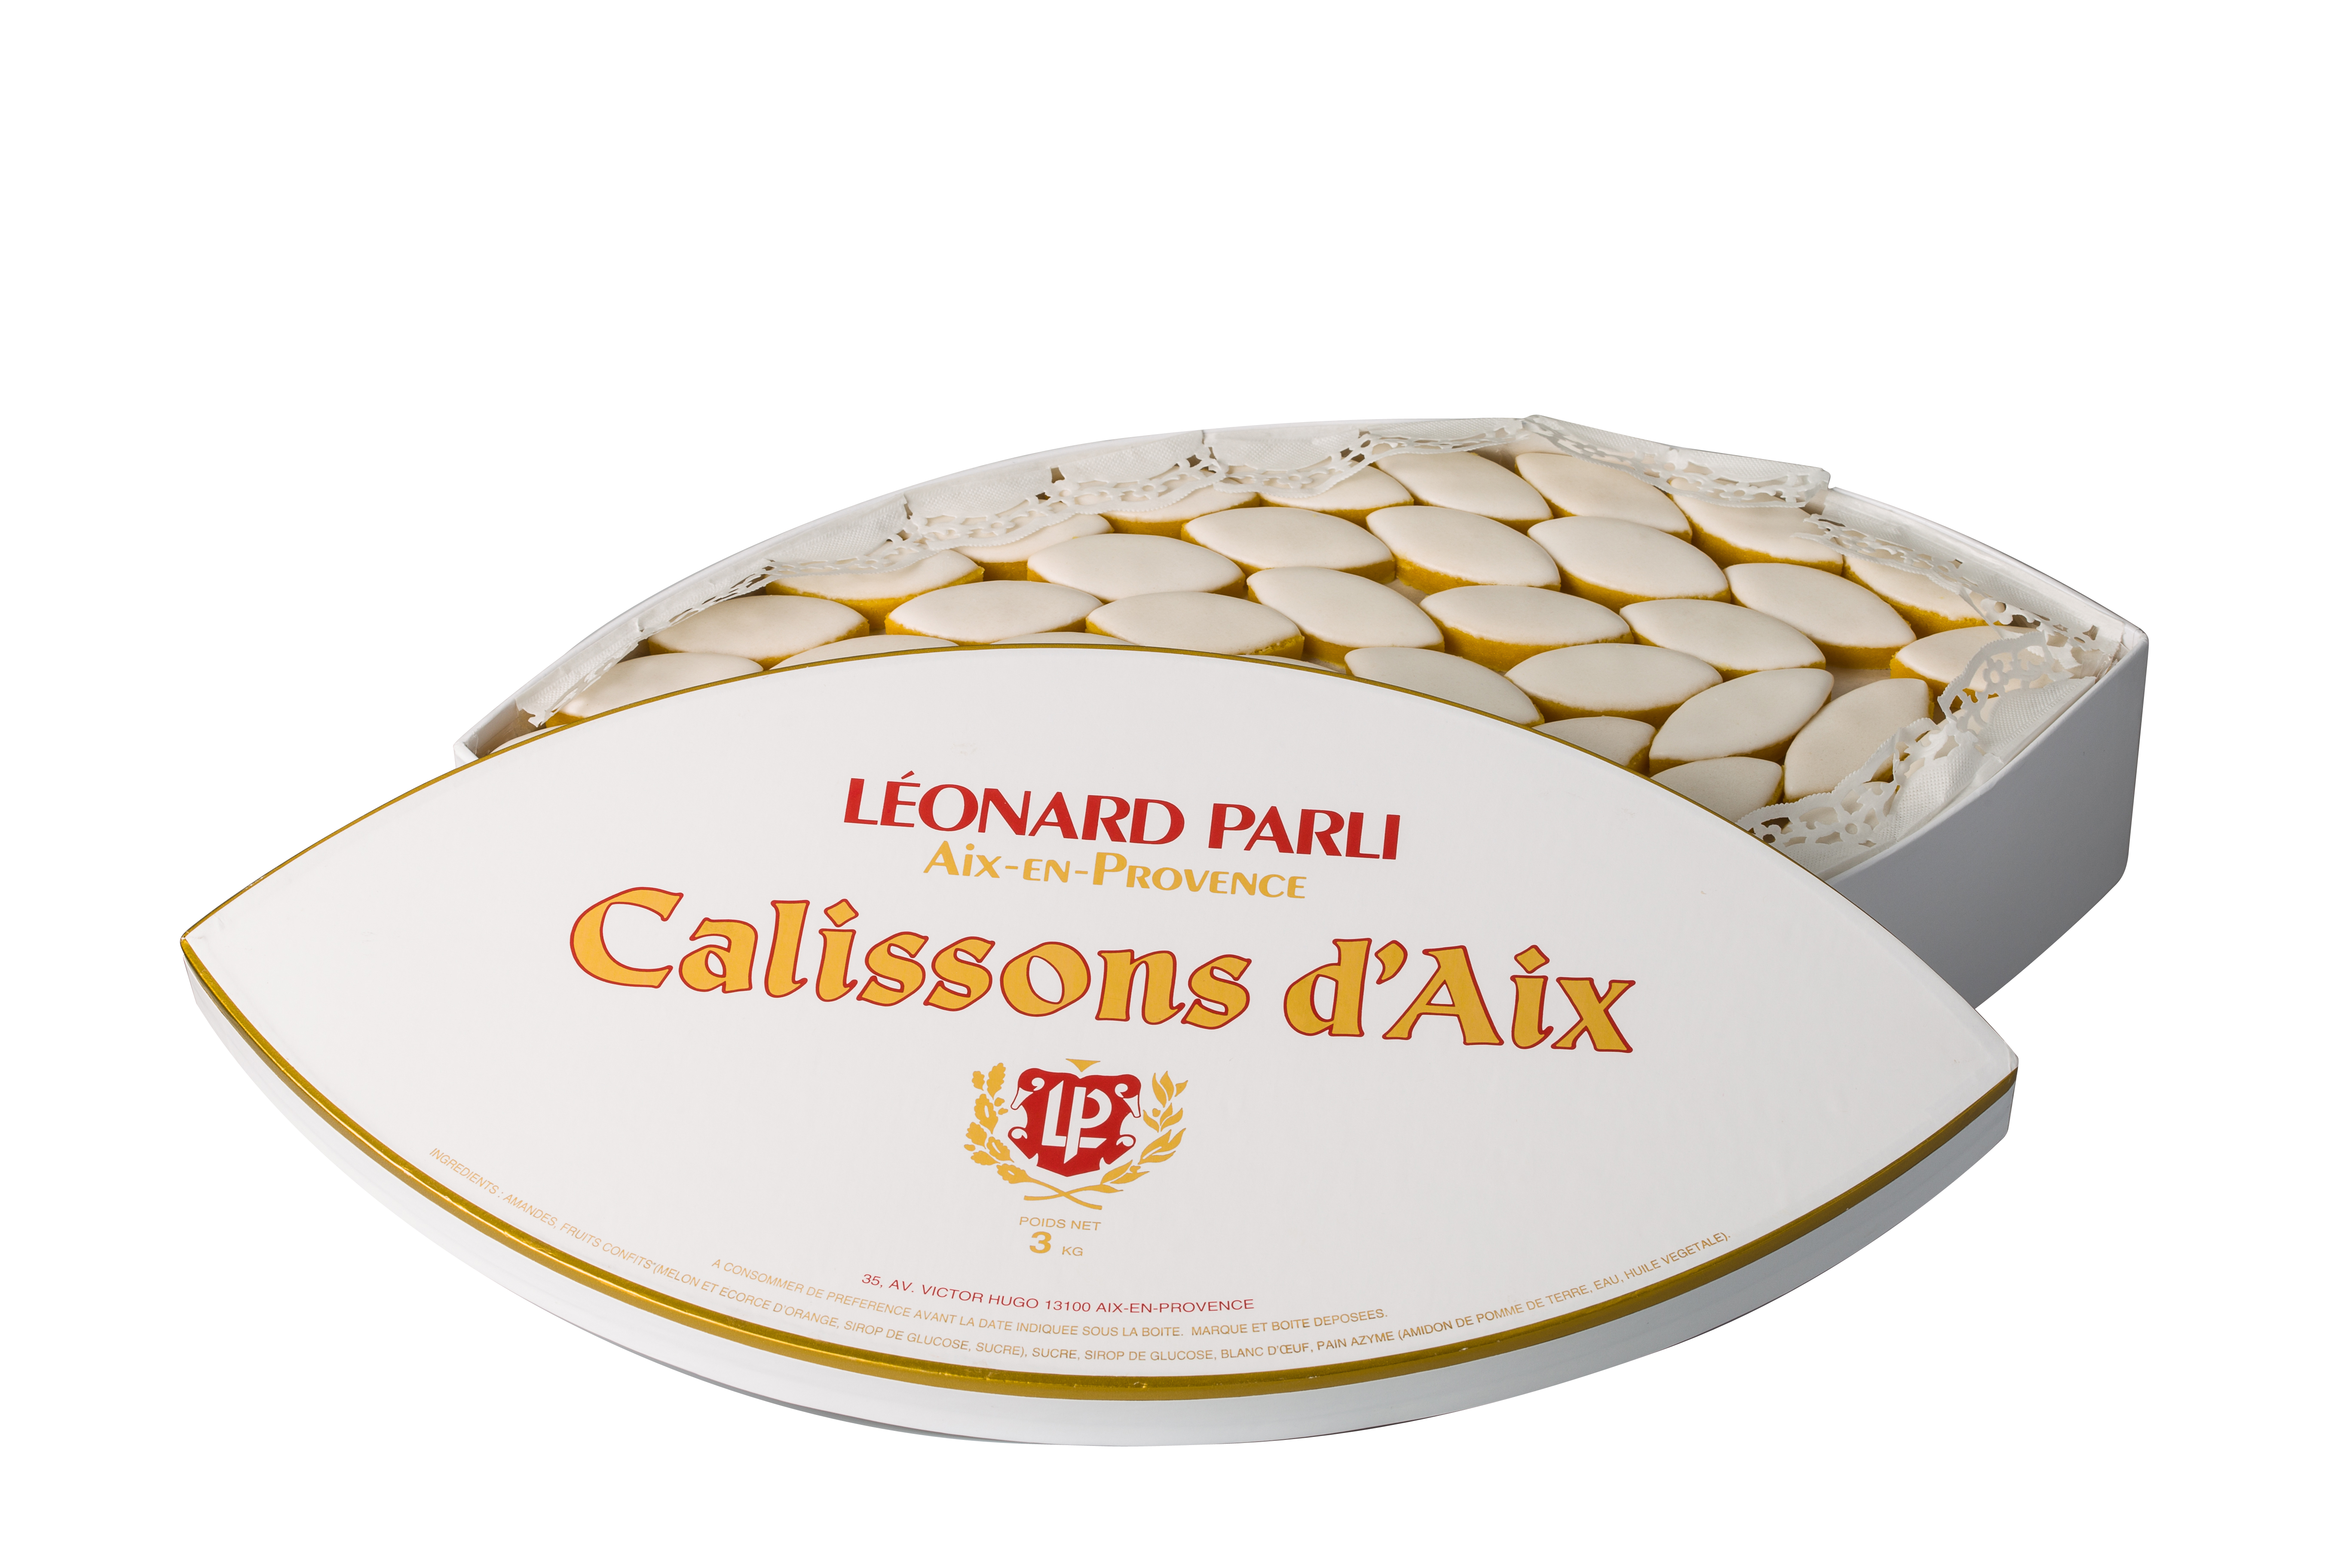 Calissons d'Aix. delicious sweets! 100% Made in Provence.